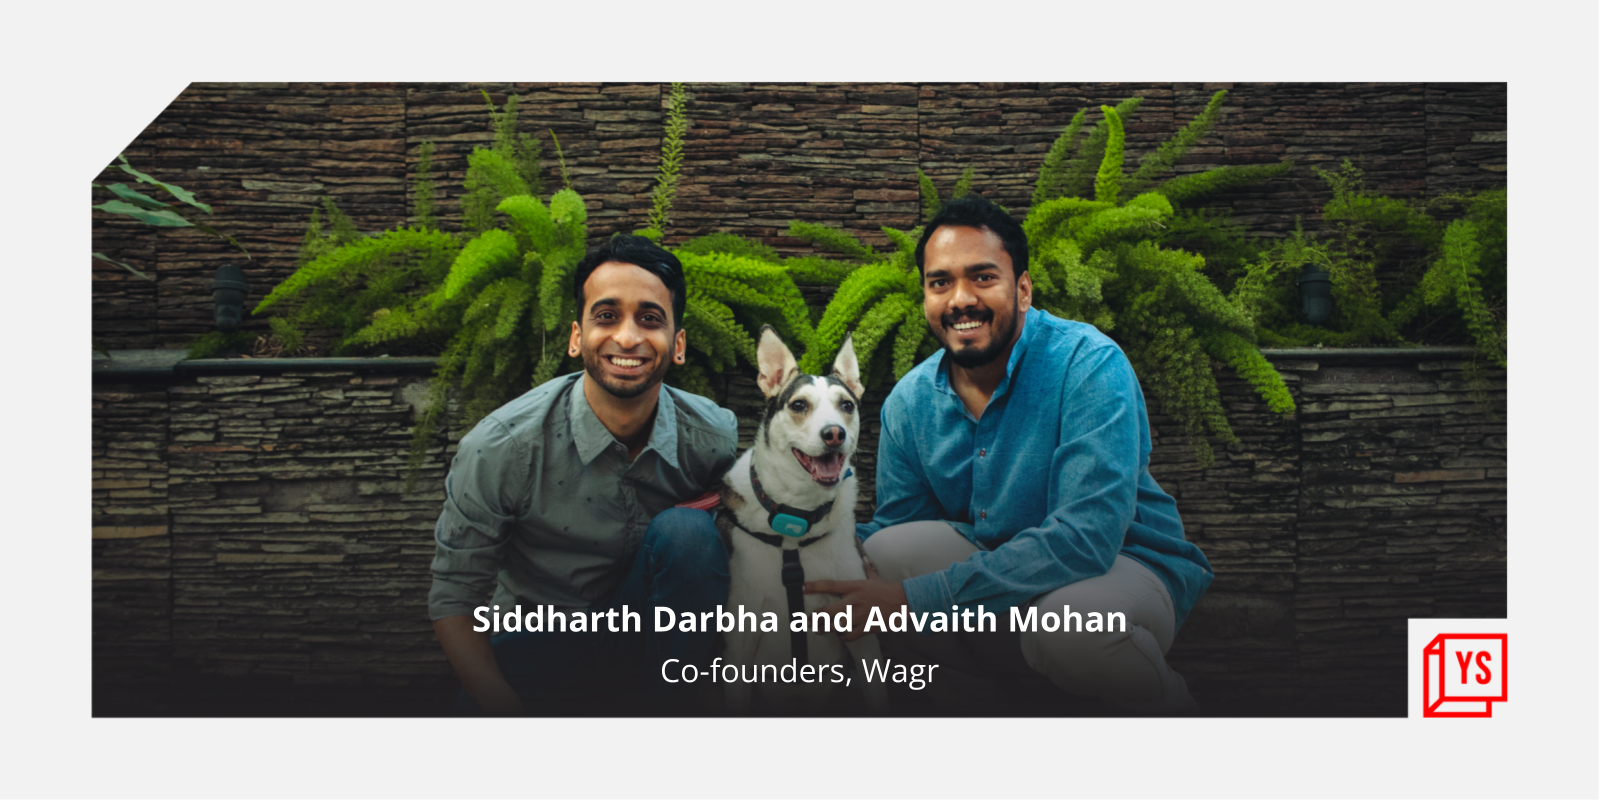 How a lost dog inspired two friends to build a pet tracker that grew into a full-fledged petcare startup